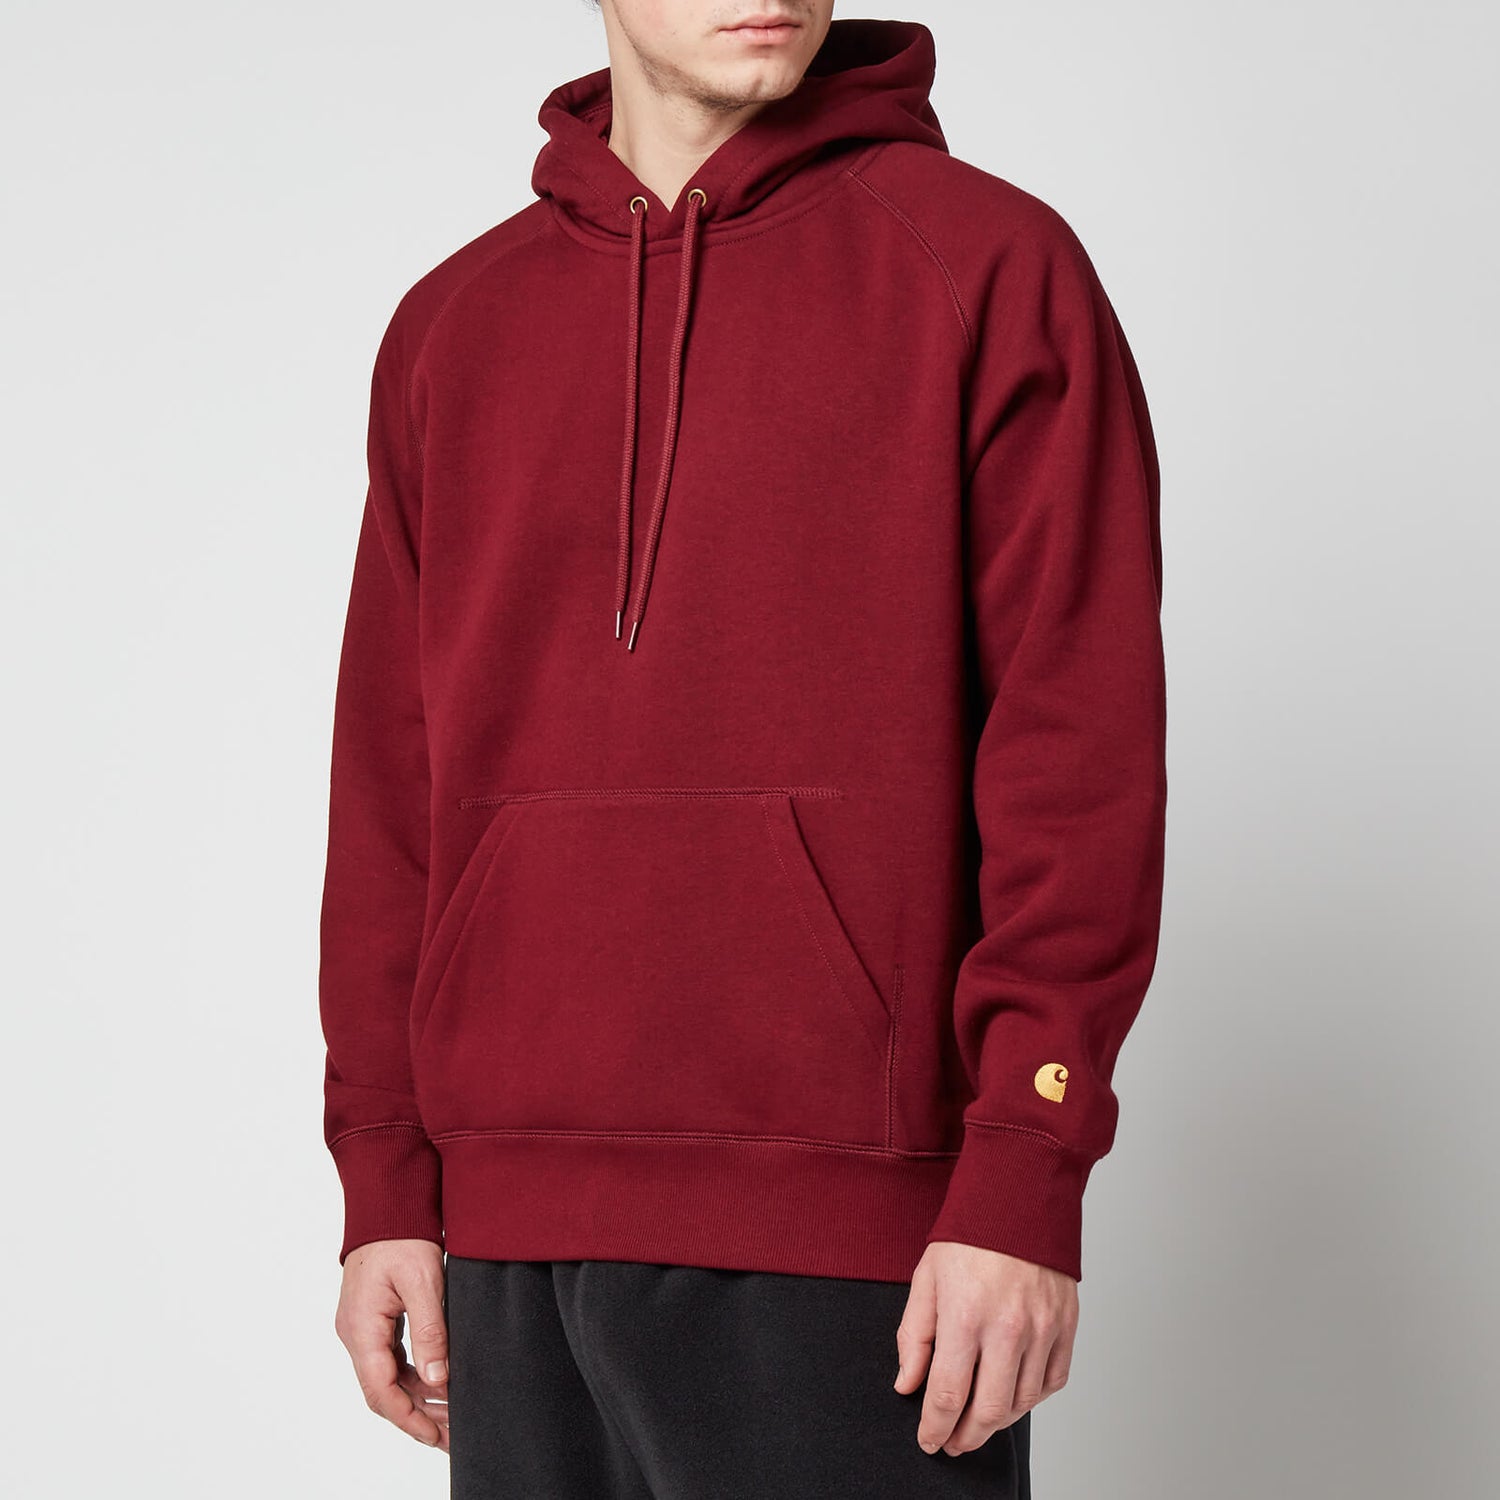 Carhartt WIP Men's Chase Pullover Hoodie - Jam/Gold